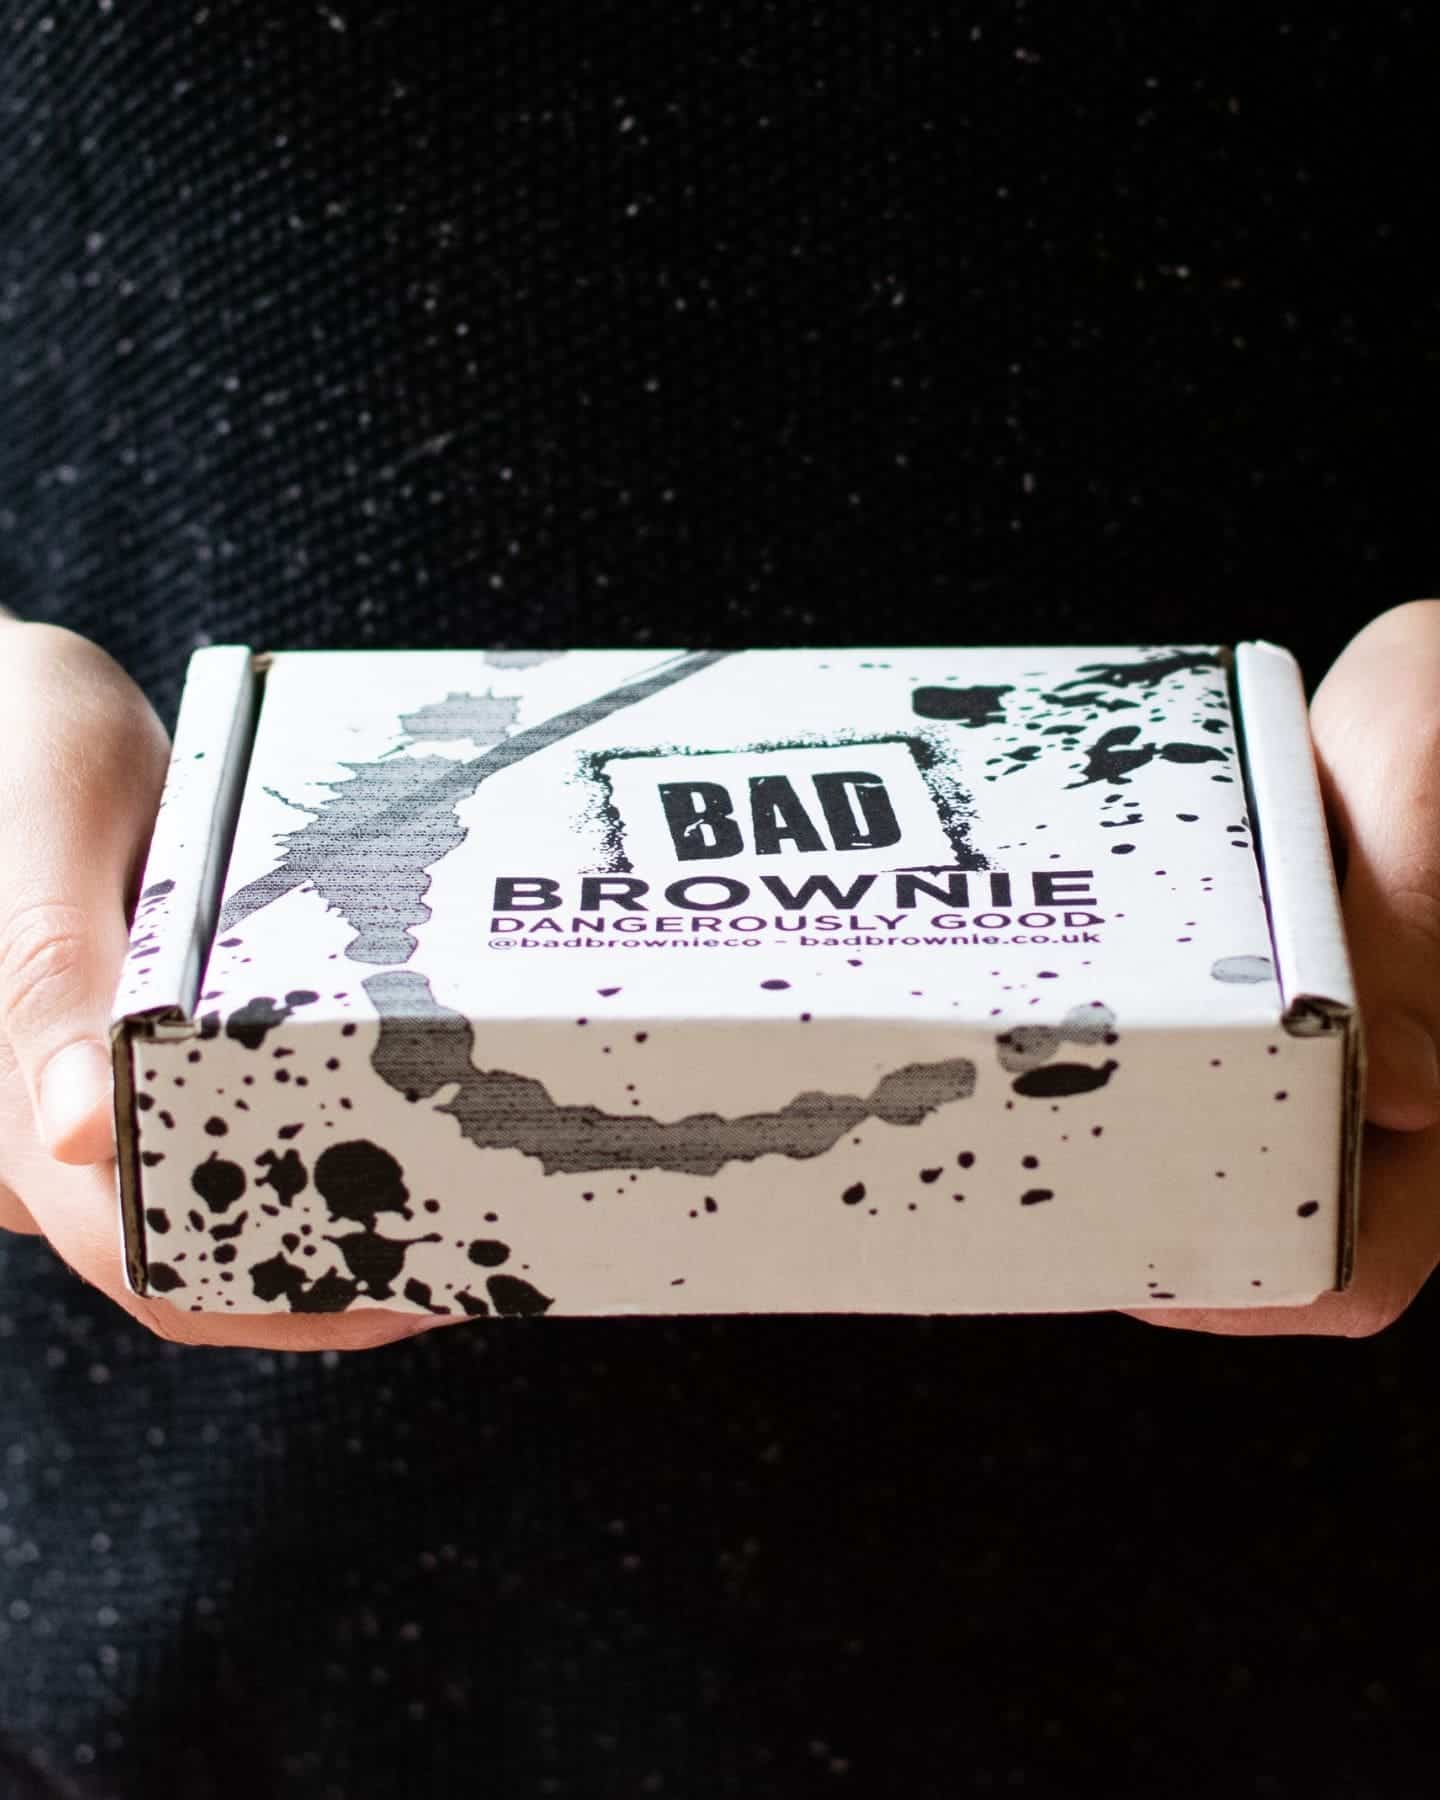 A set of hands holding a box. The box says Bad Brownie – Dangerously Good. It has a black and grey paint splatter effect as the design.